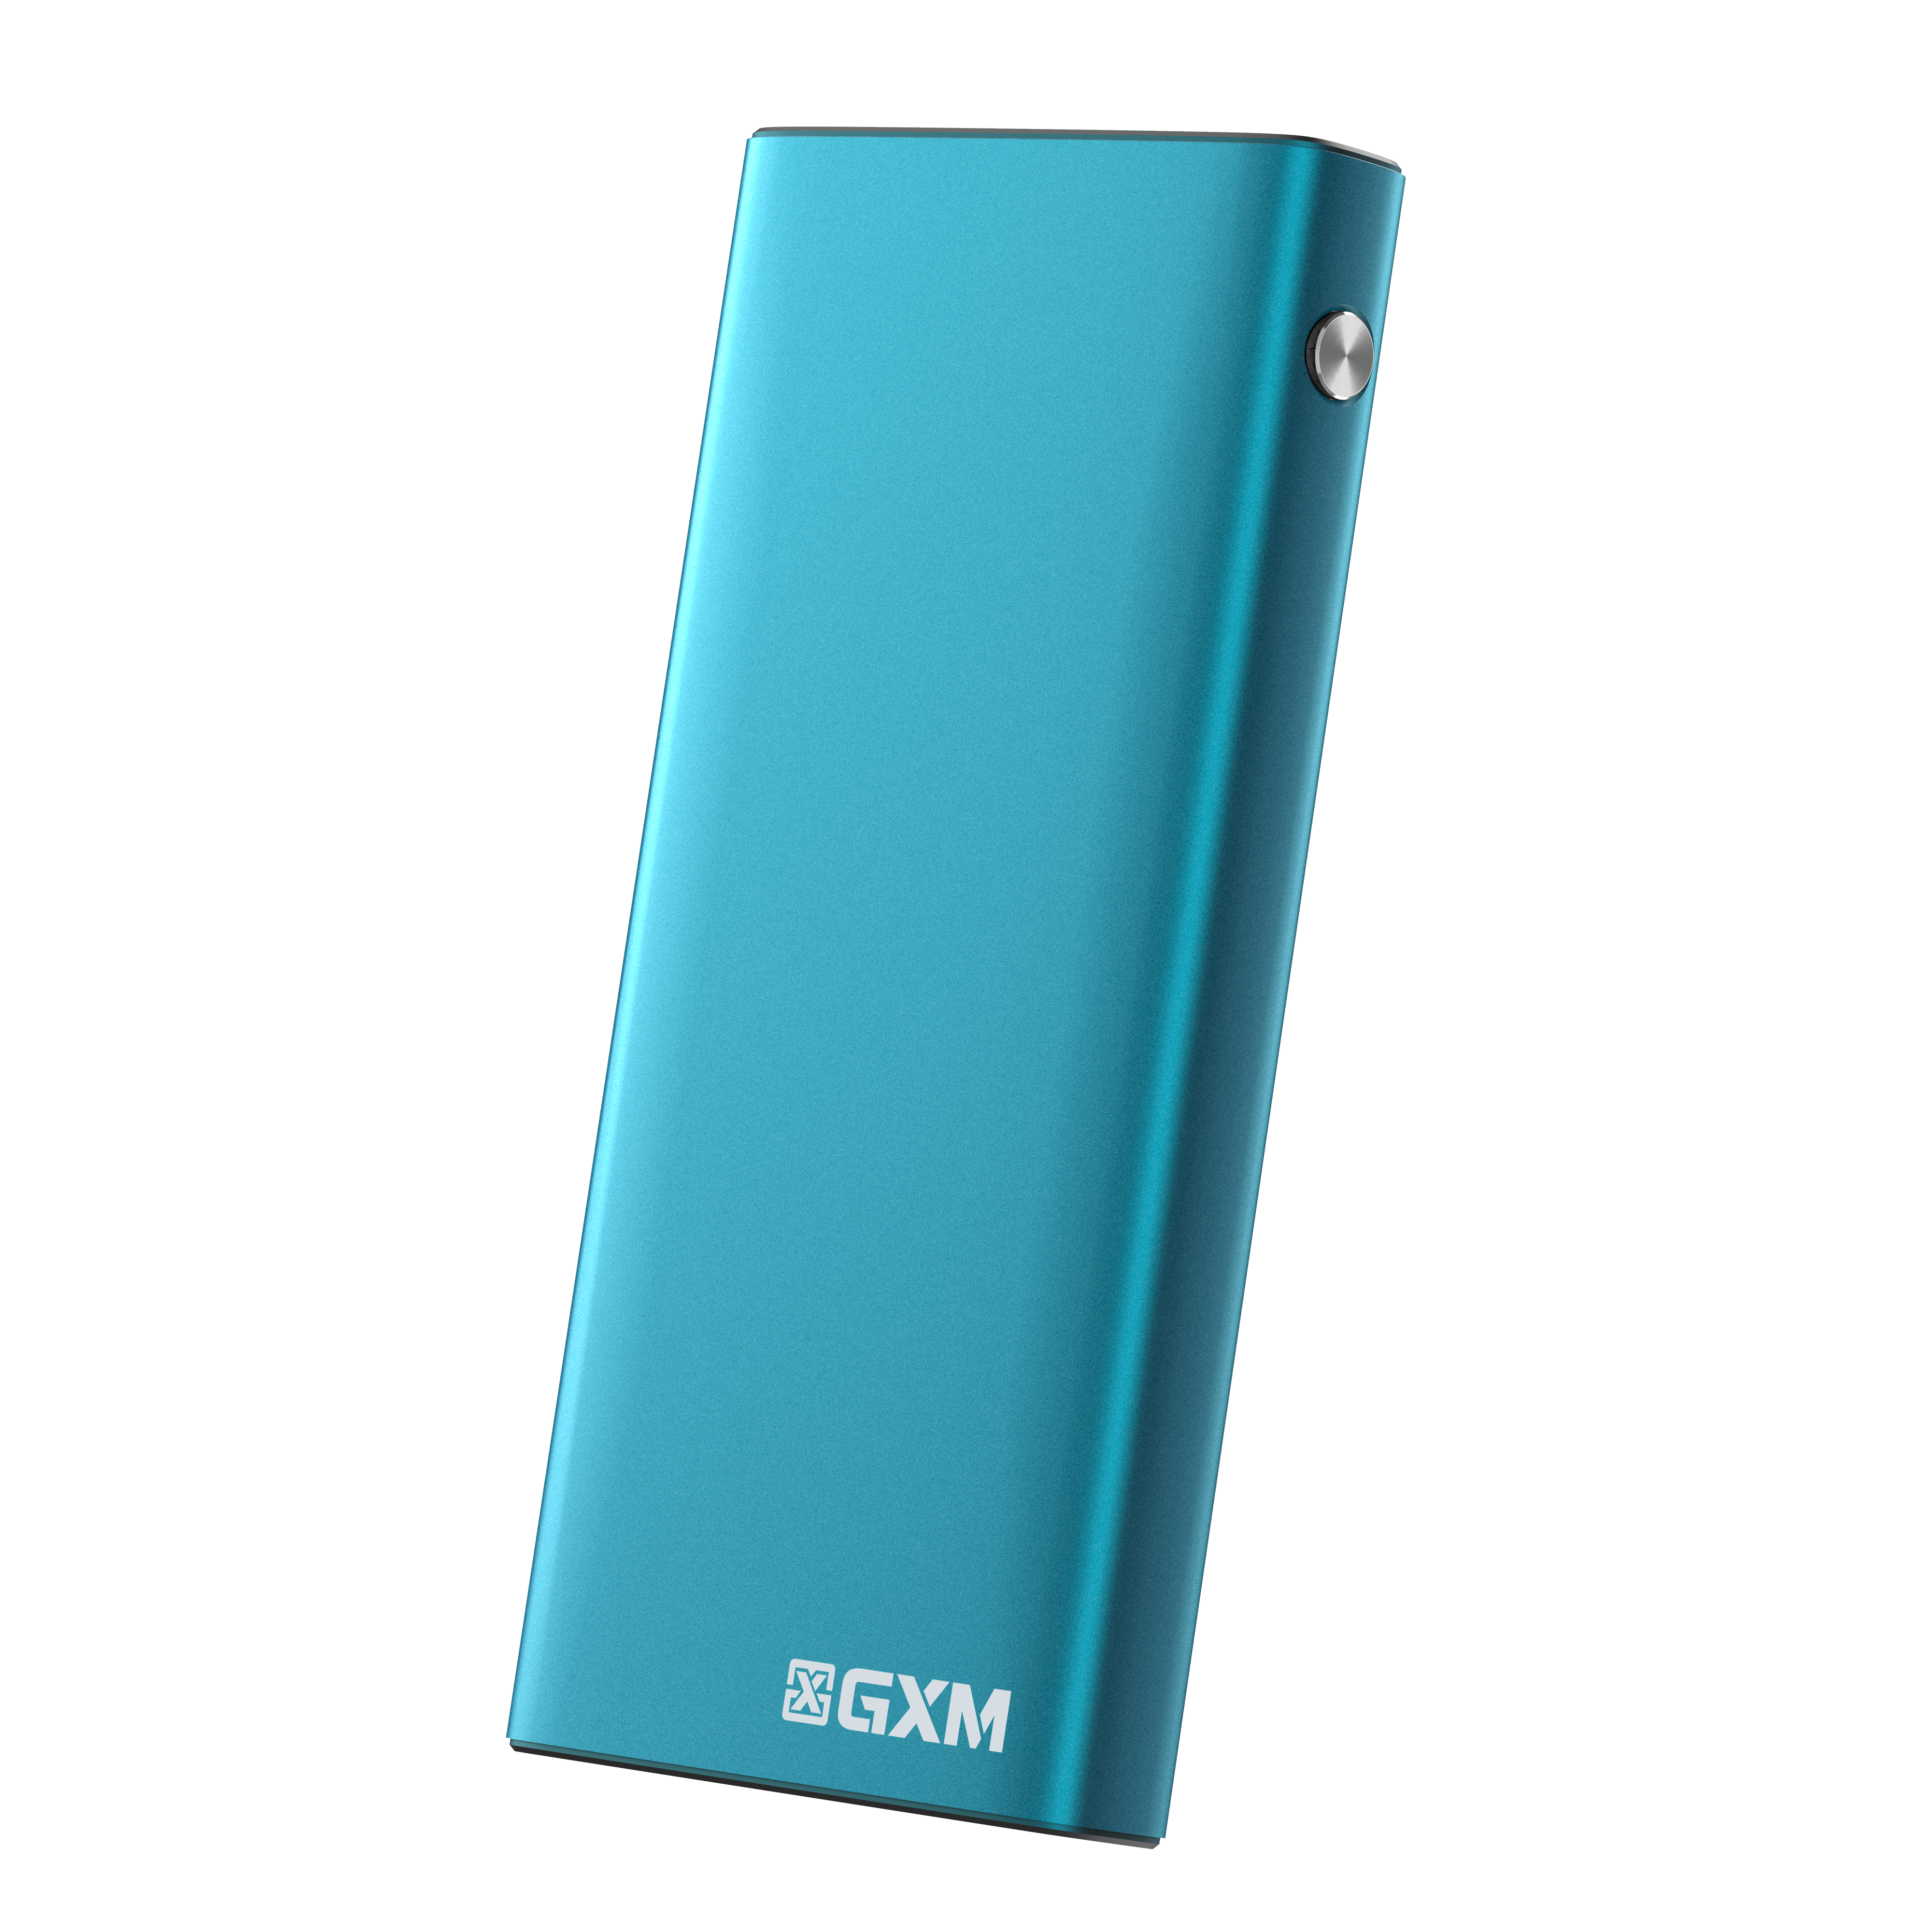 GXM Ultra-Thin 10000mAh Power Bank with 22.5W PD Fast Charging for iPhone and Samsung PB-1225 Powerbank